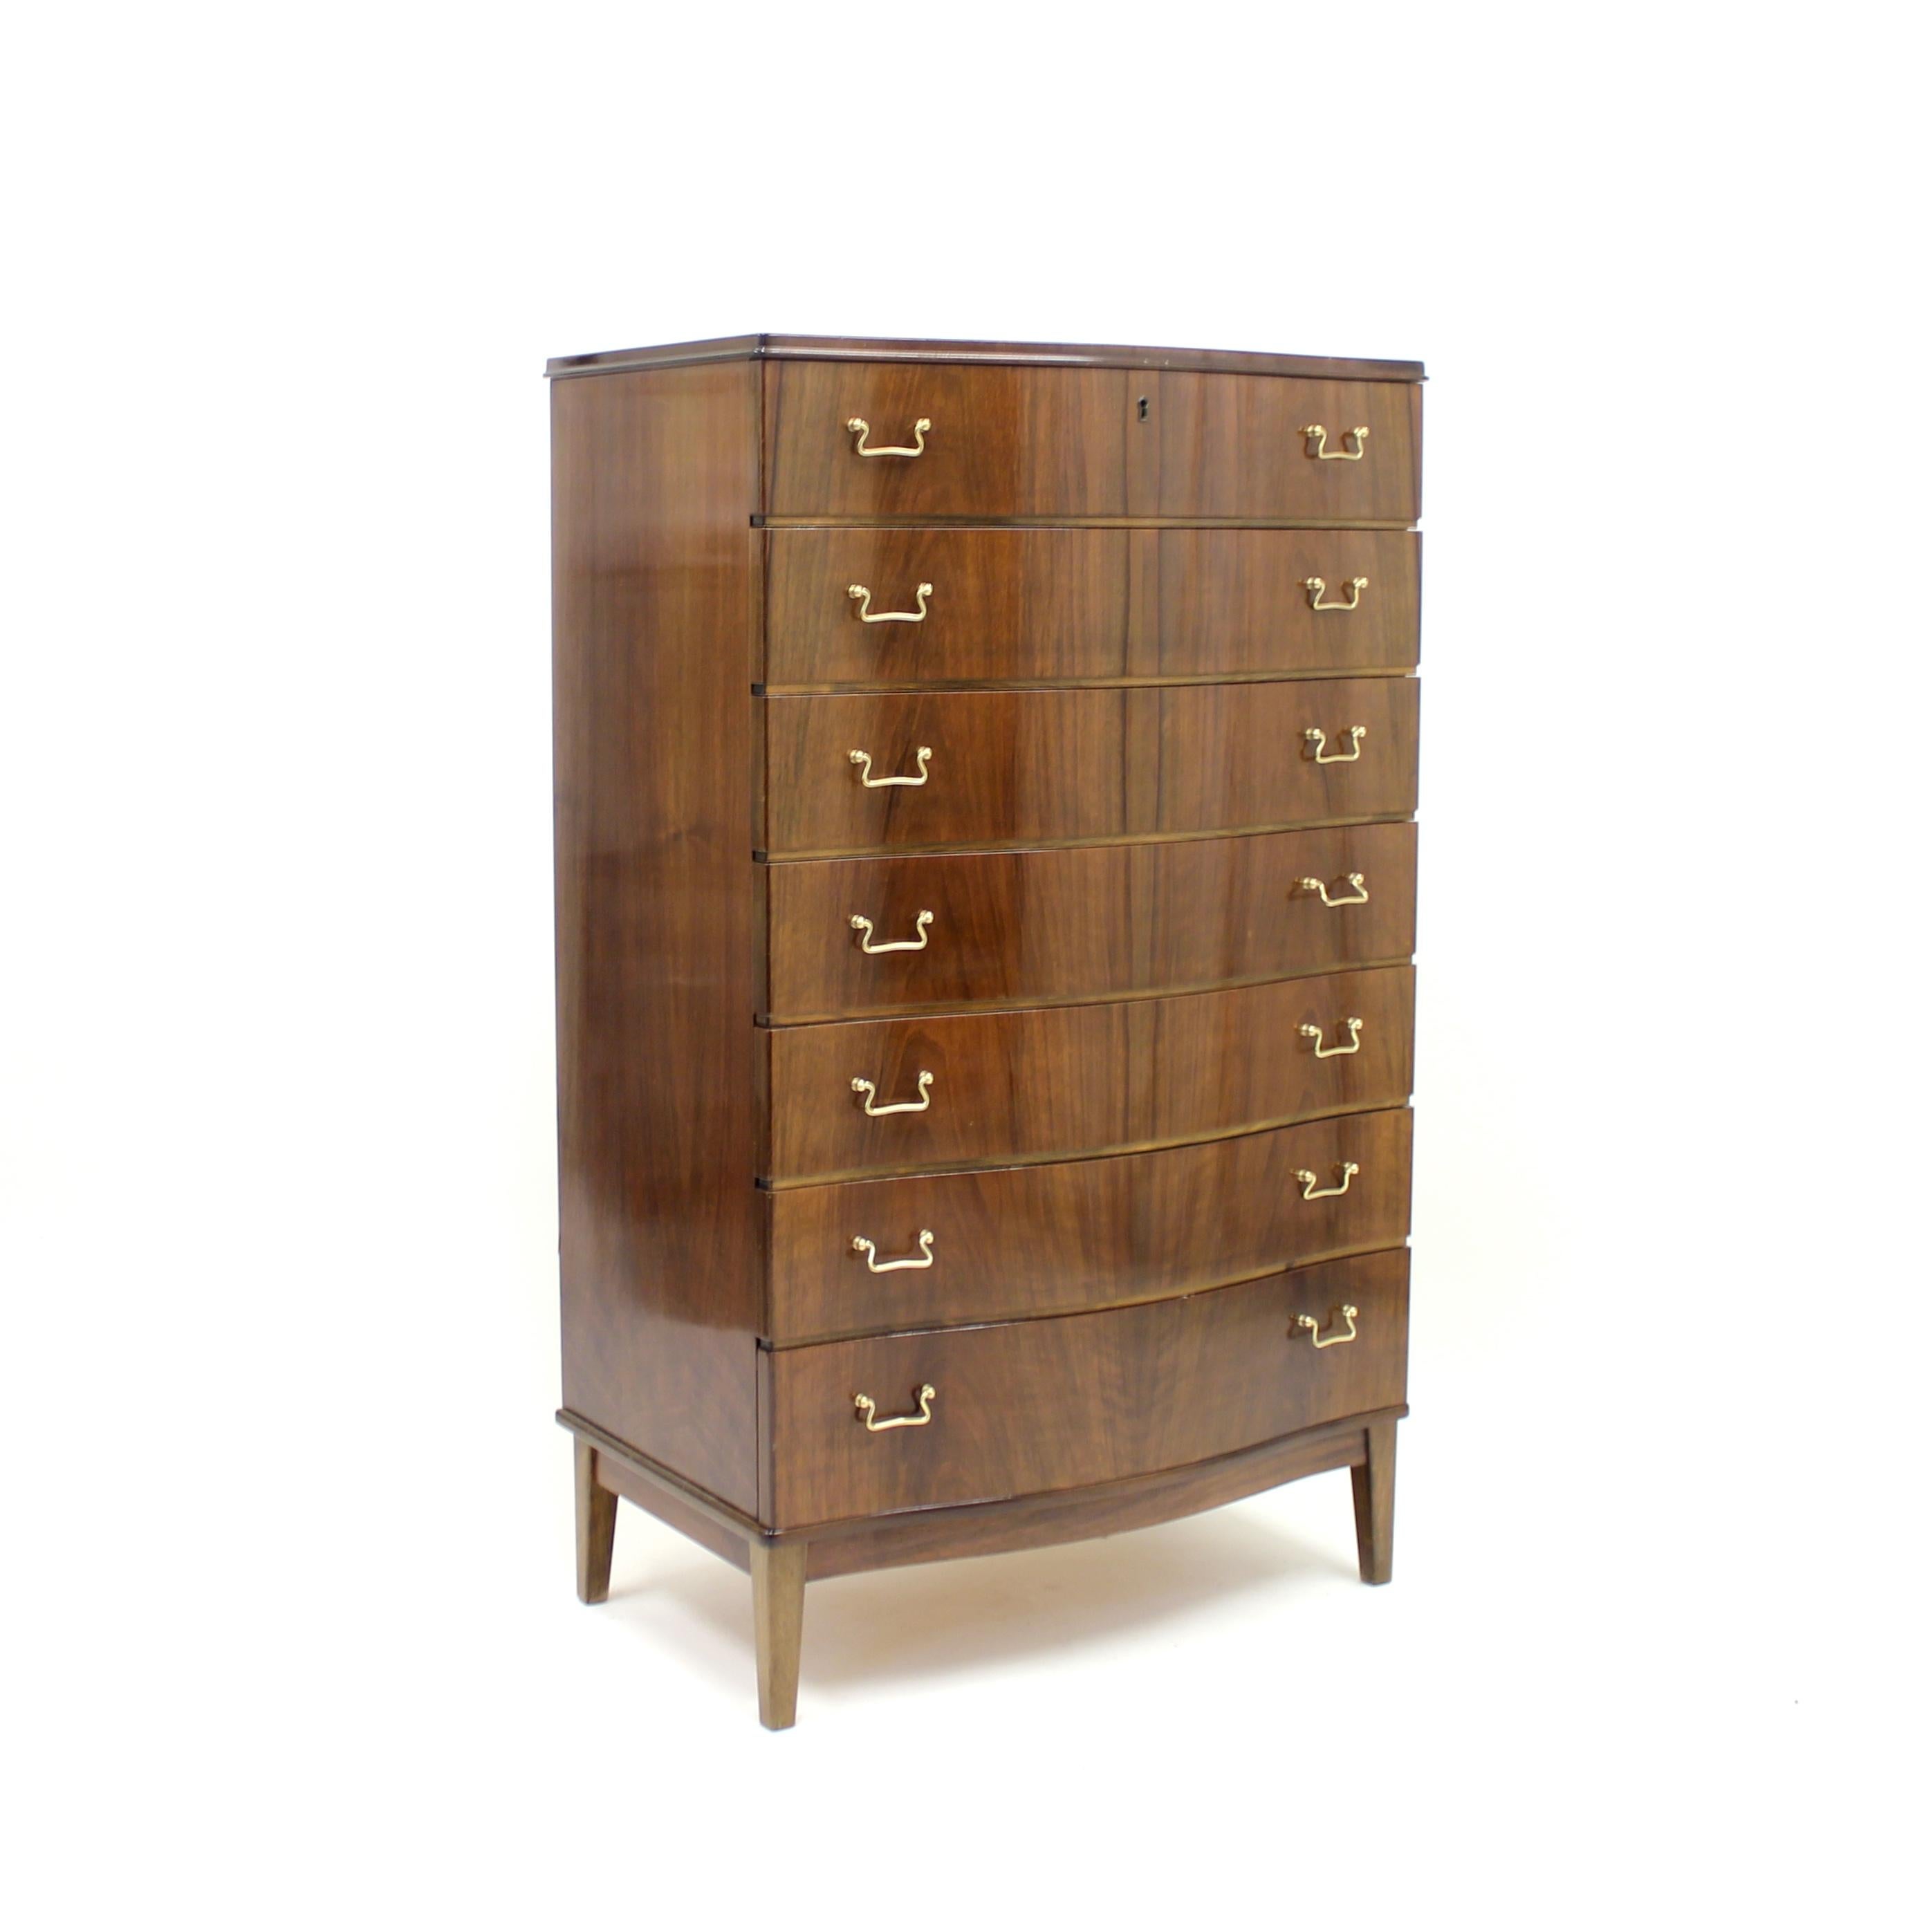 Scandinavian, most likely Danish, chest of drawers in walnut with curved front and brass handles. Unknown manufacturer. Made in circa 1950s. Ware consistent with age and use.